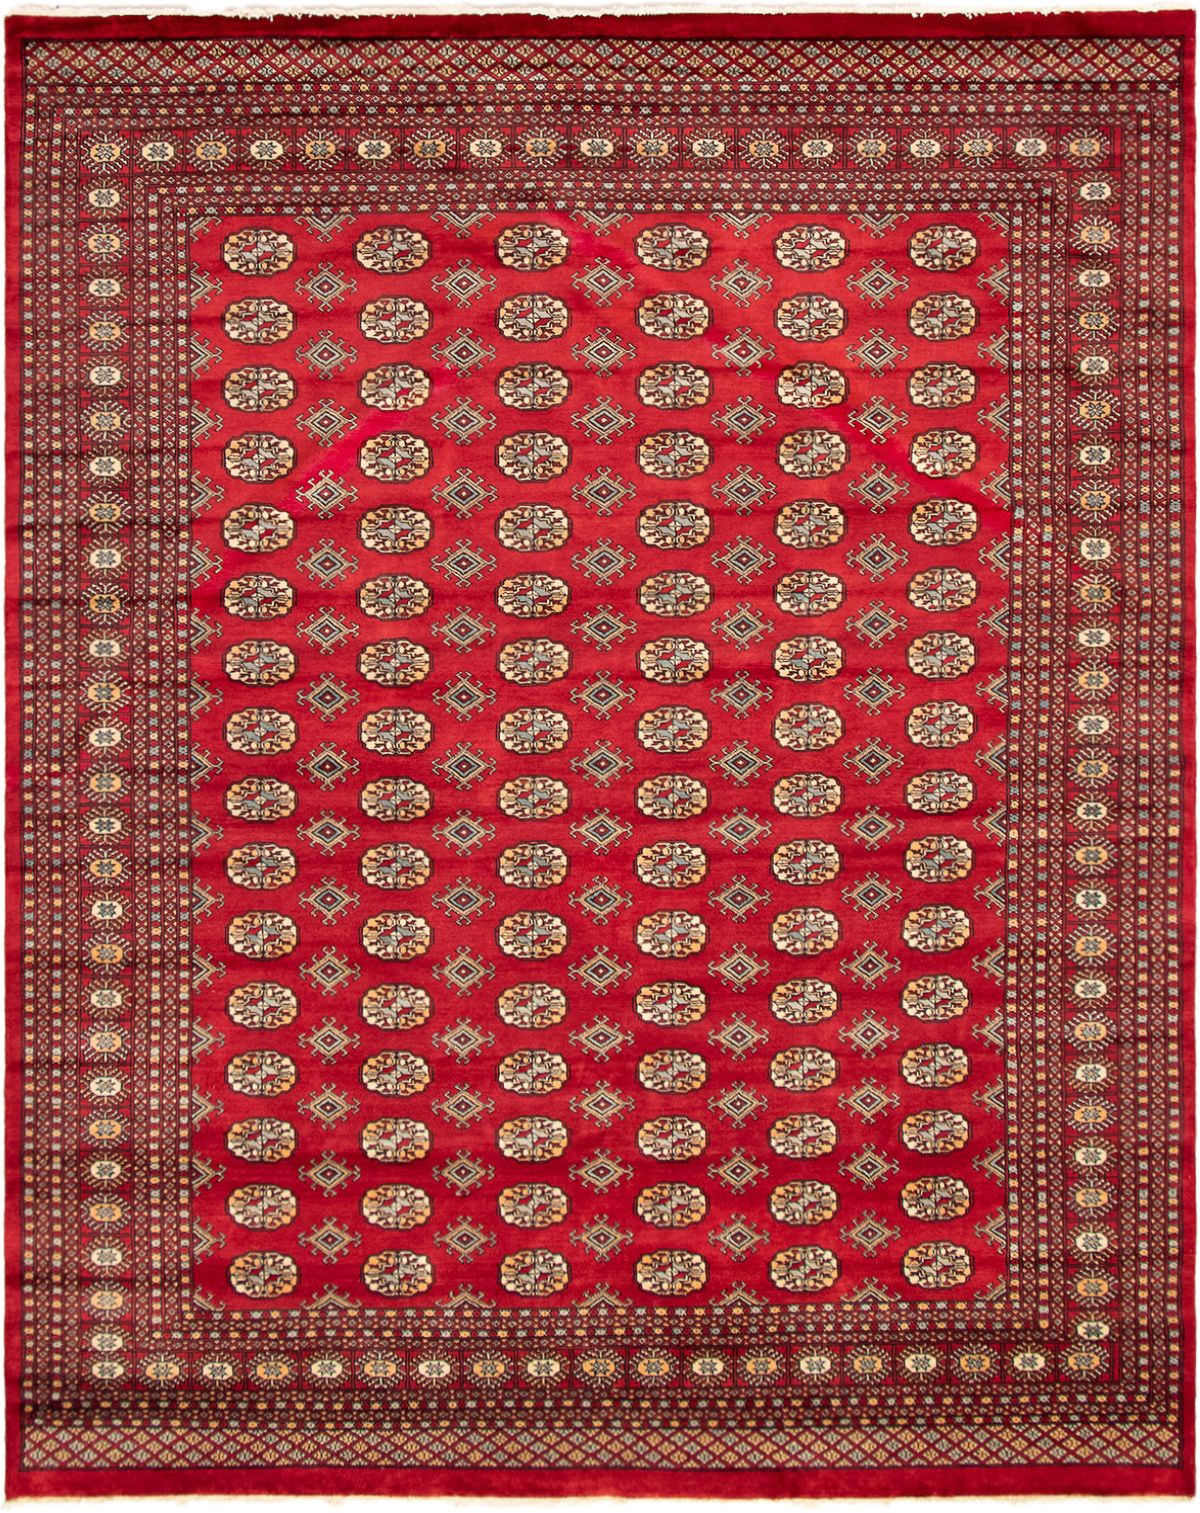 Hand-knotted Finest Peshawar Bokhara Red Wool Rug 8'0" x 9'11" Size: 8'0" x 9'11"  